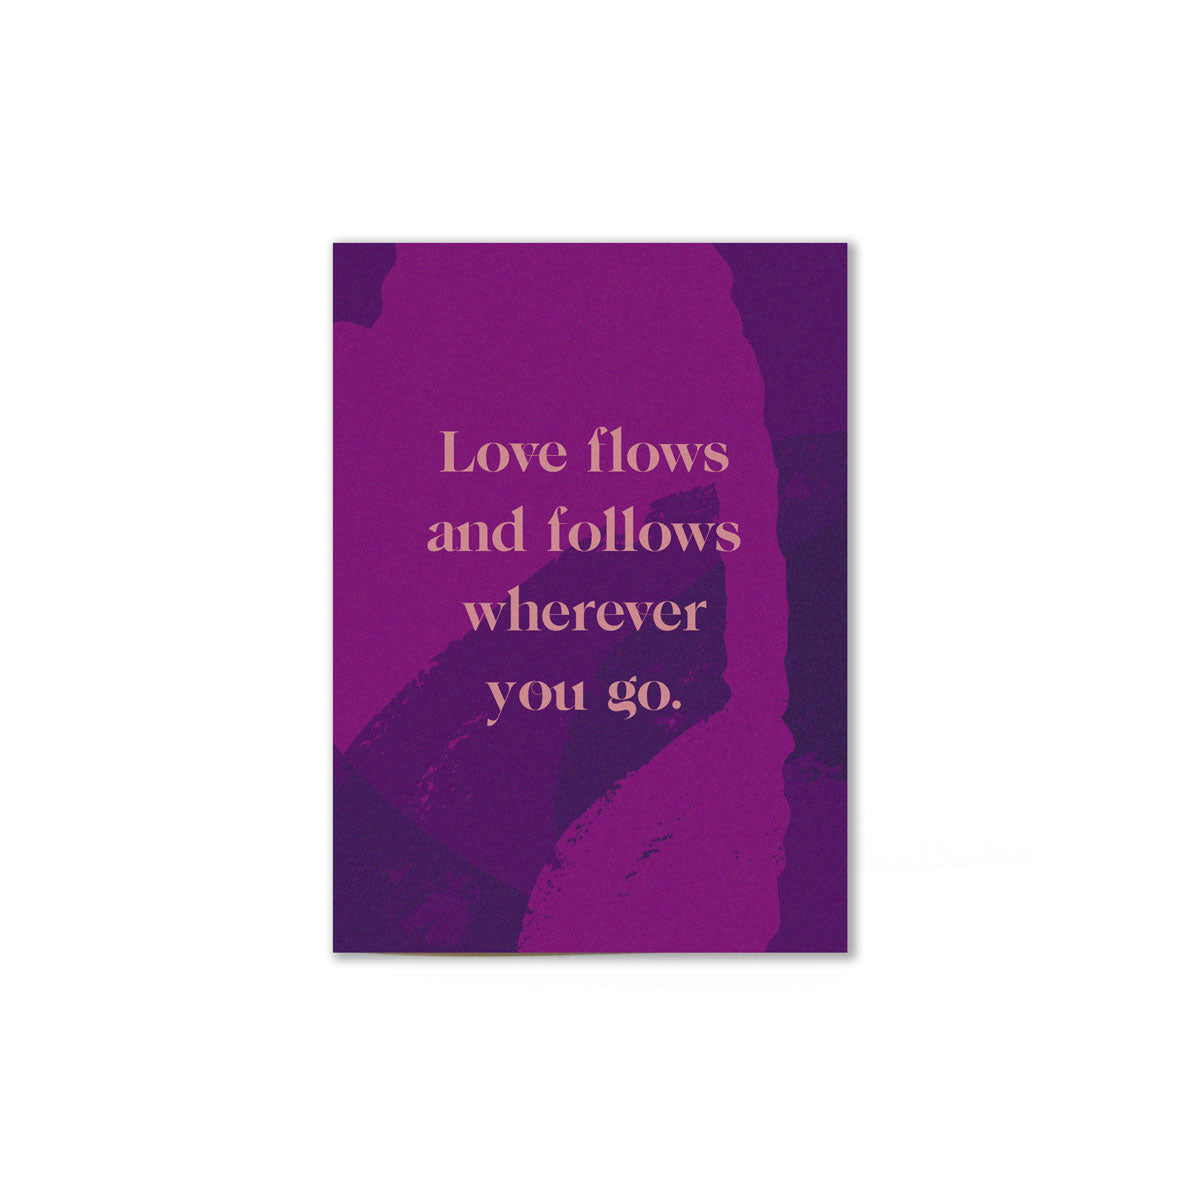 purple colored love flows card that reads "Love flows and follows wherever you go"